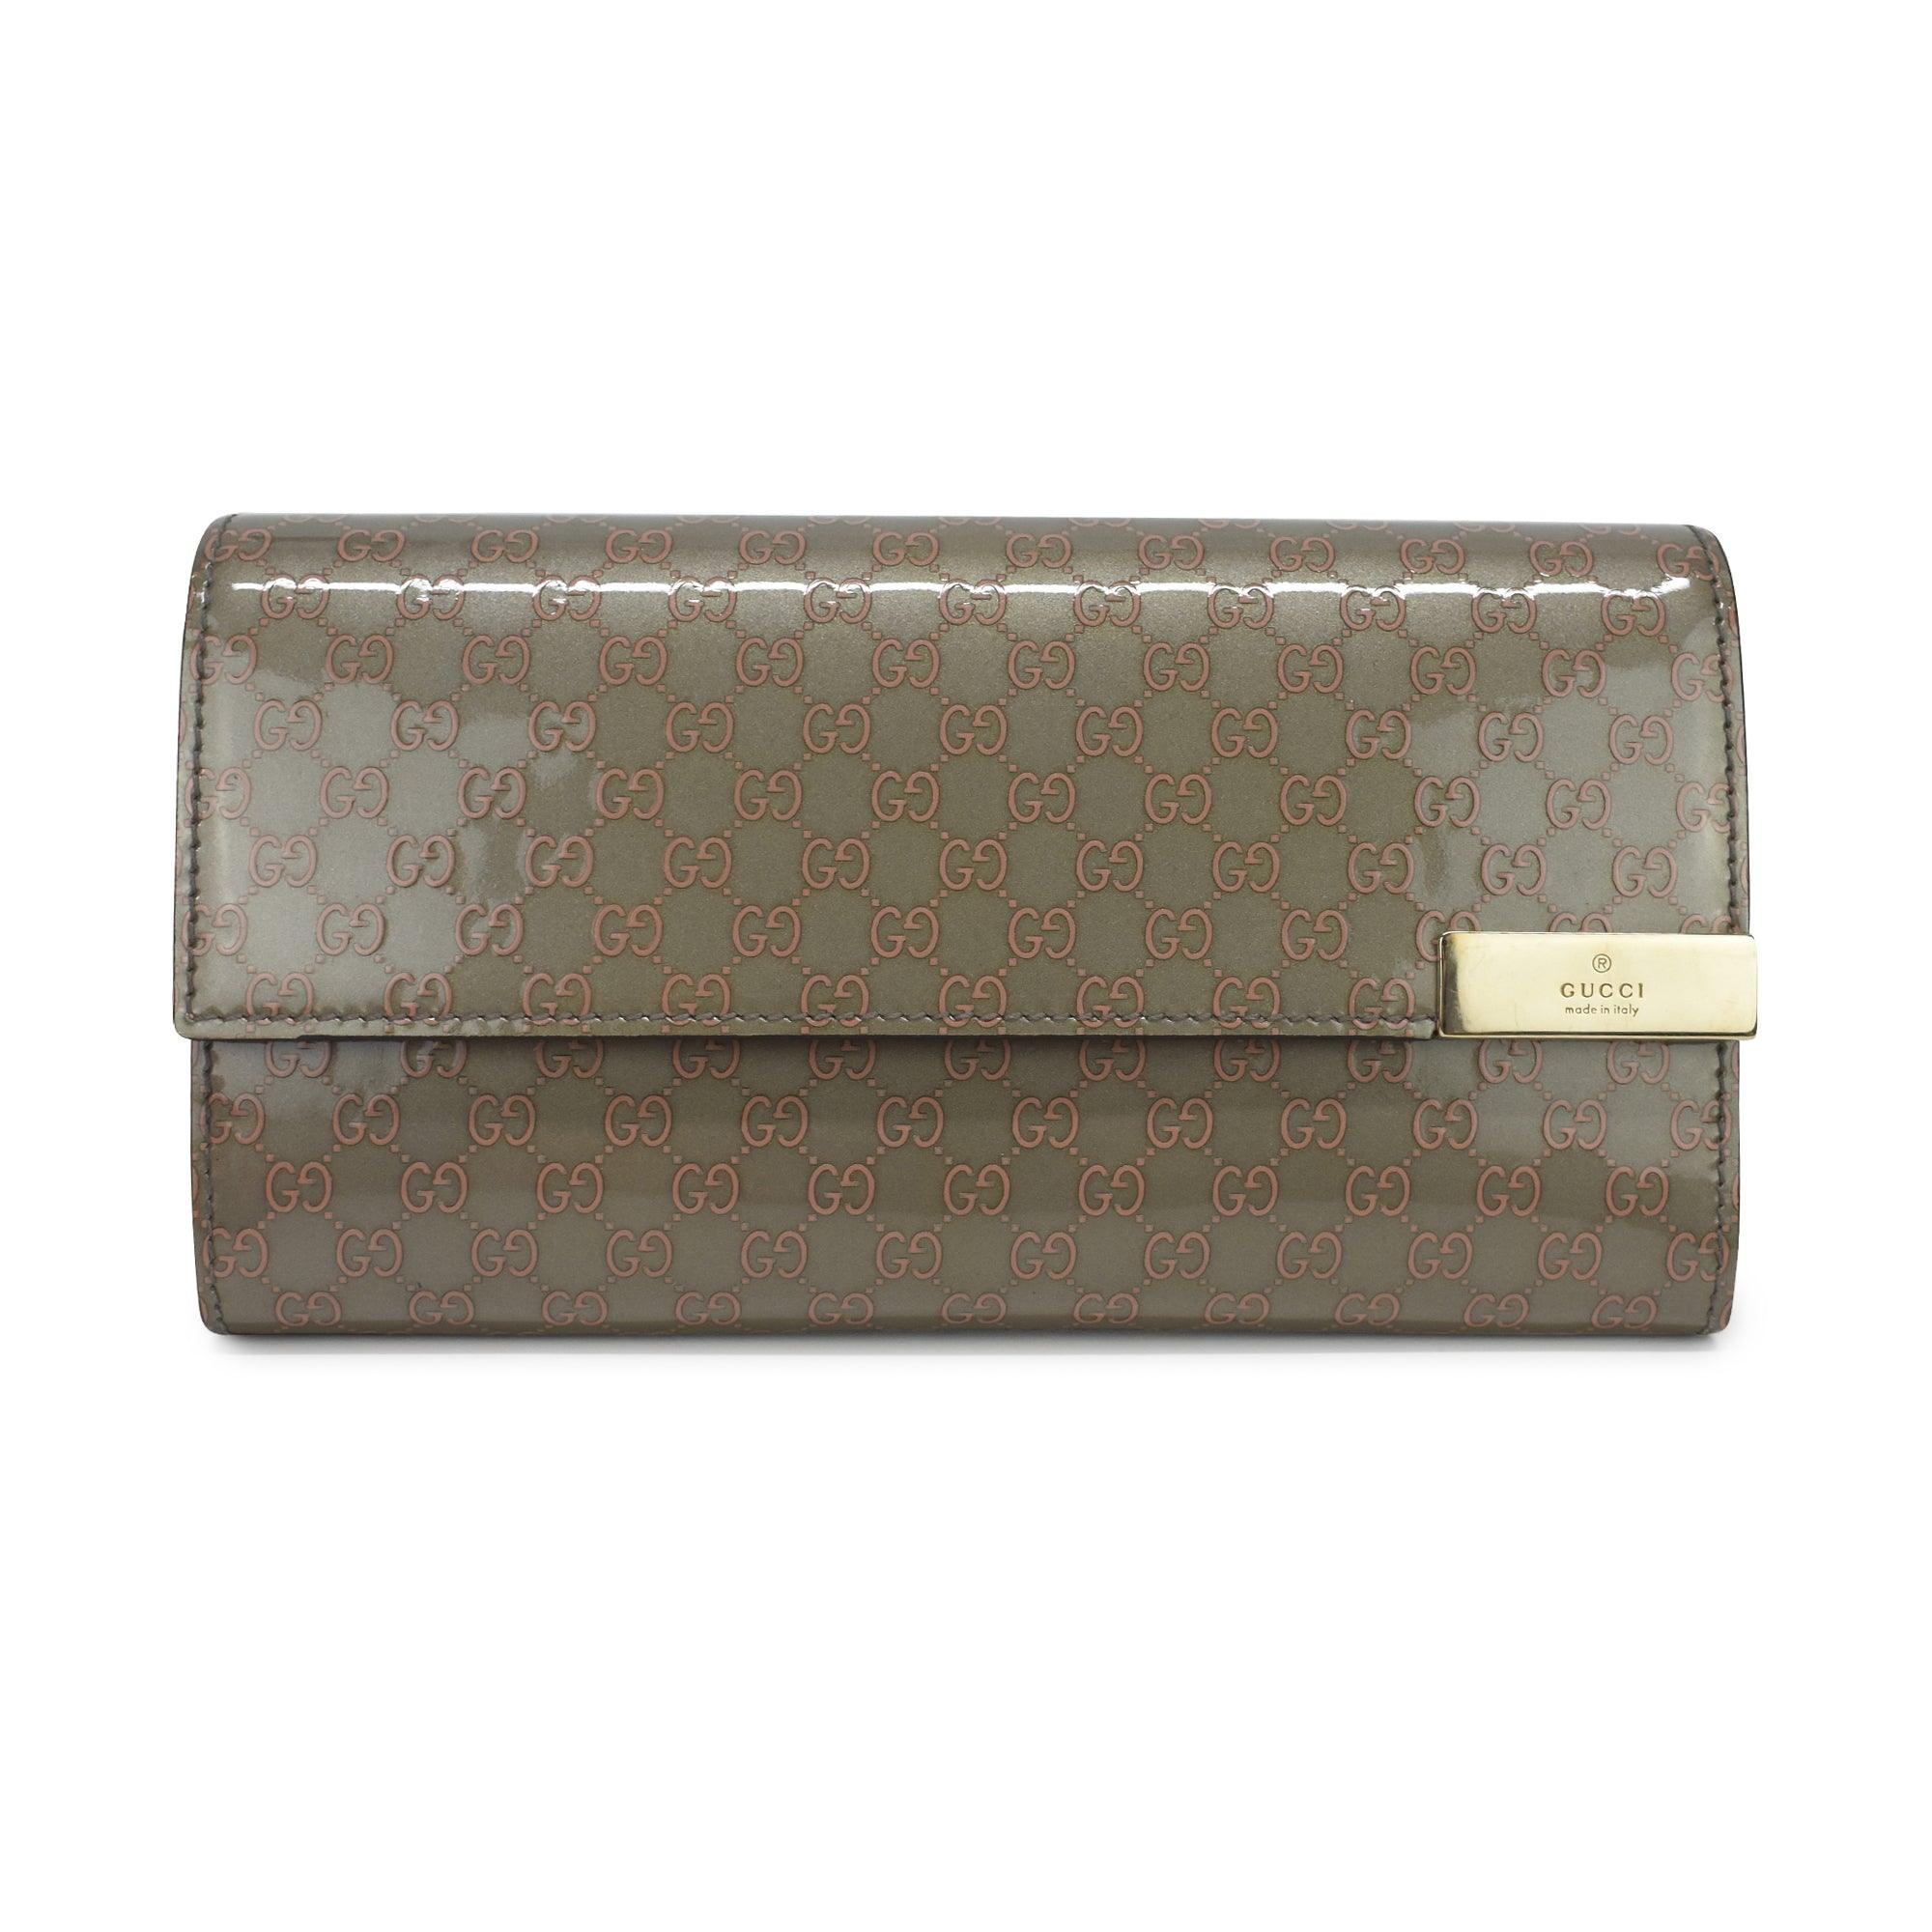 Gucci Snap Wallet - Fashionably Yours